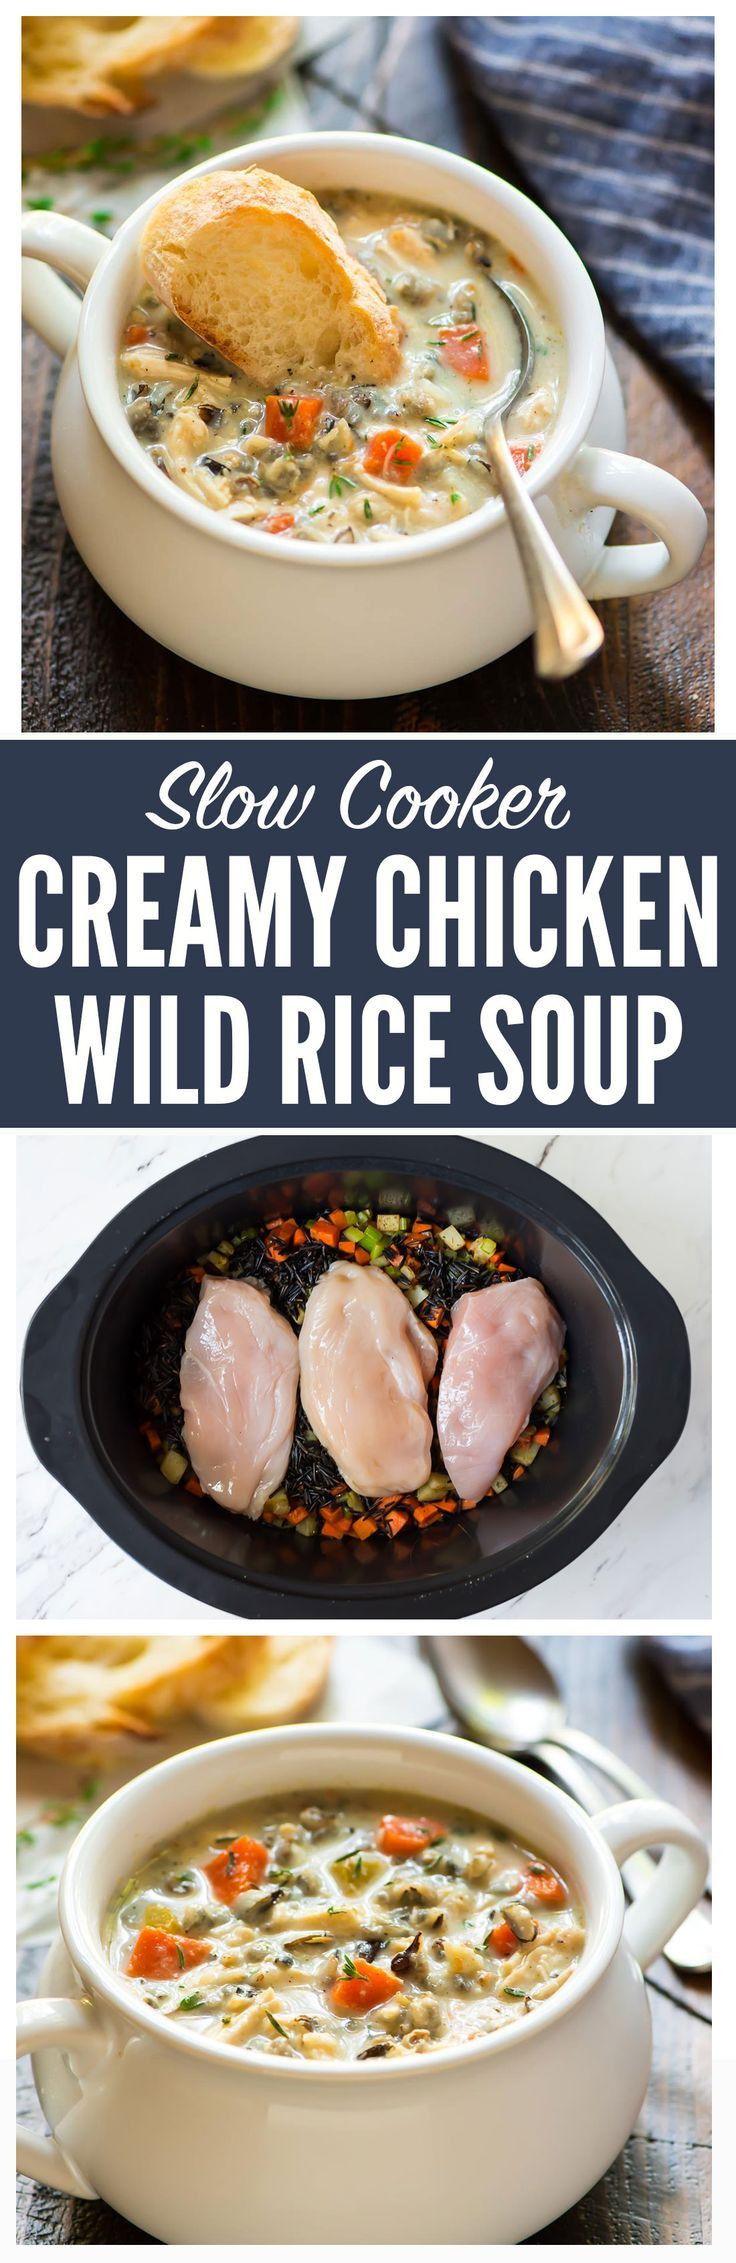 Panera Chicken And Wild Rice Soup Slow Cooker
 Slow Cooker Creamy Chicken and Wild Rice Soup Easy